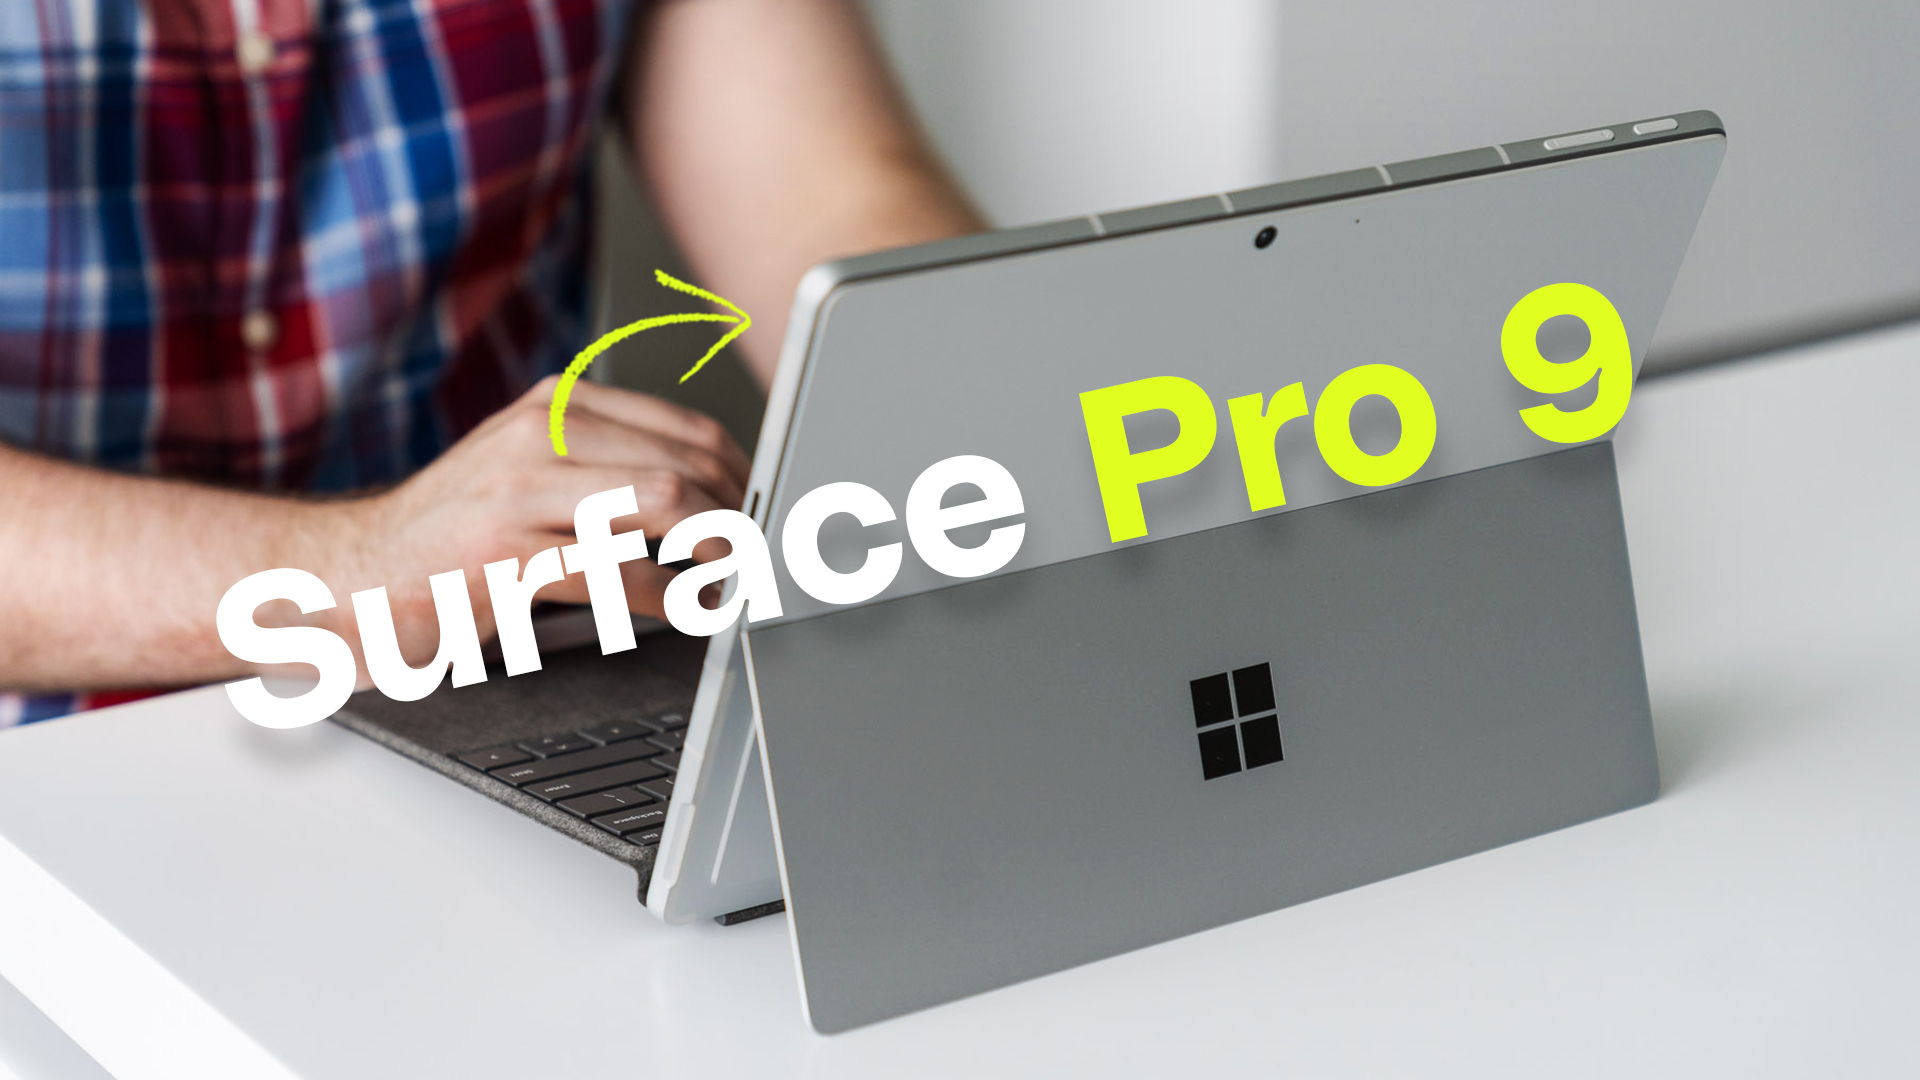 Microsoft unveils Surface Pro 9 with Intel and ARM chips, 5G support, and  new colors to mark 10th anniversary